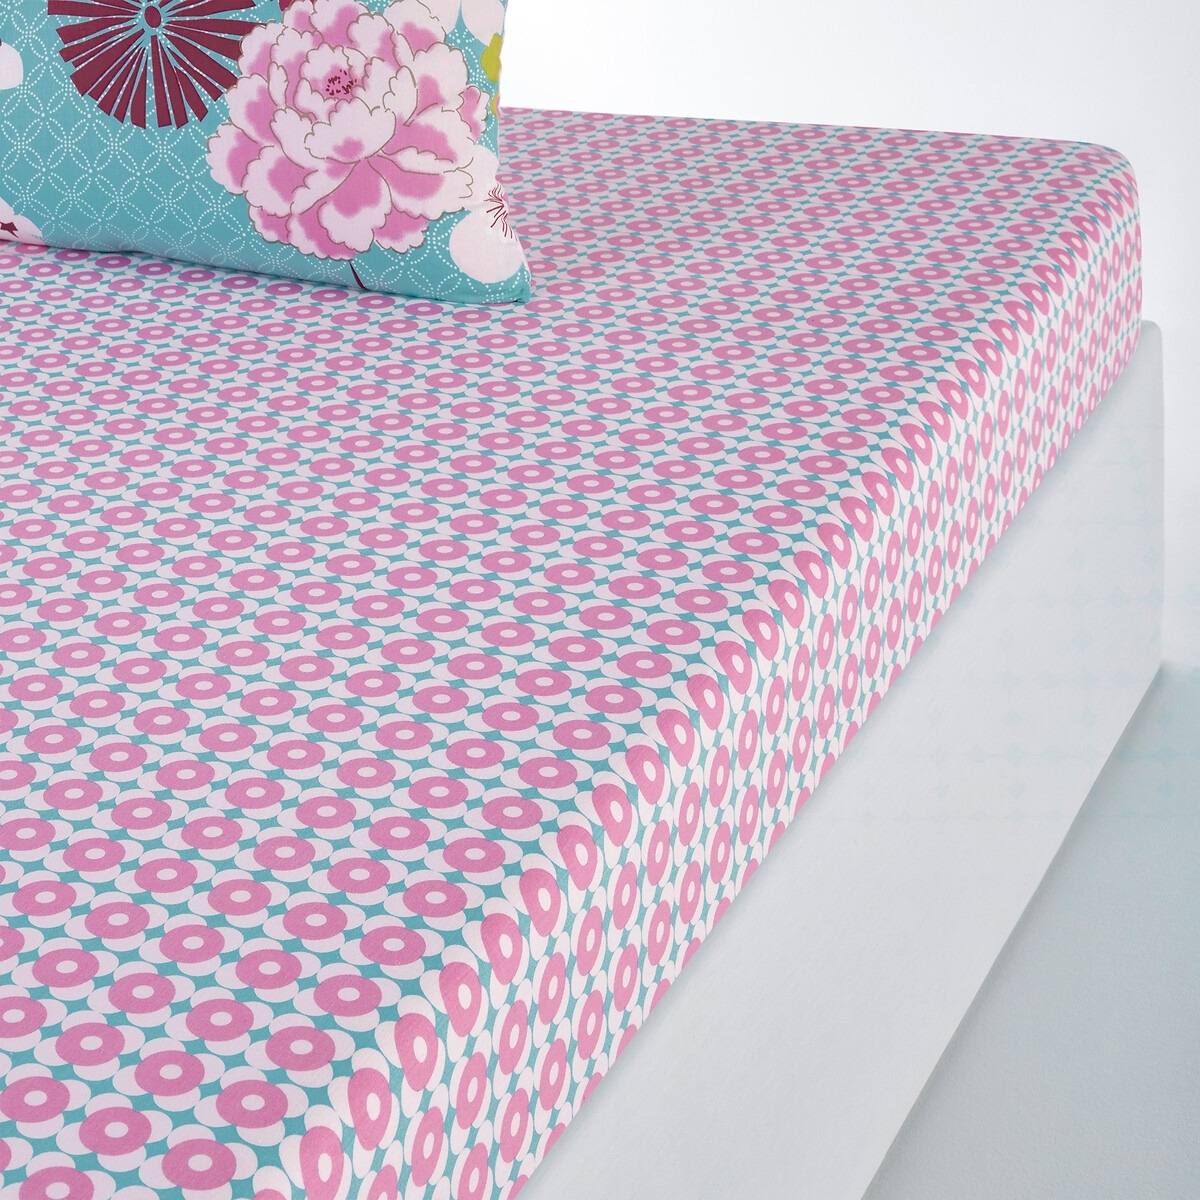 Floral 100% Cotton Fitted Sheet - image 1